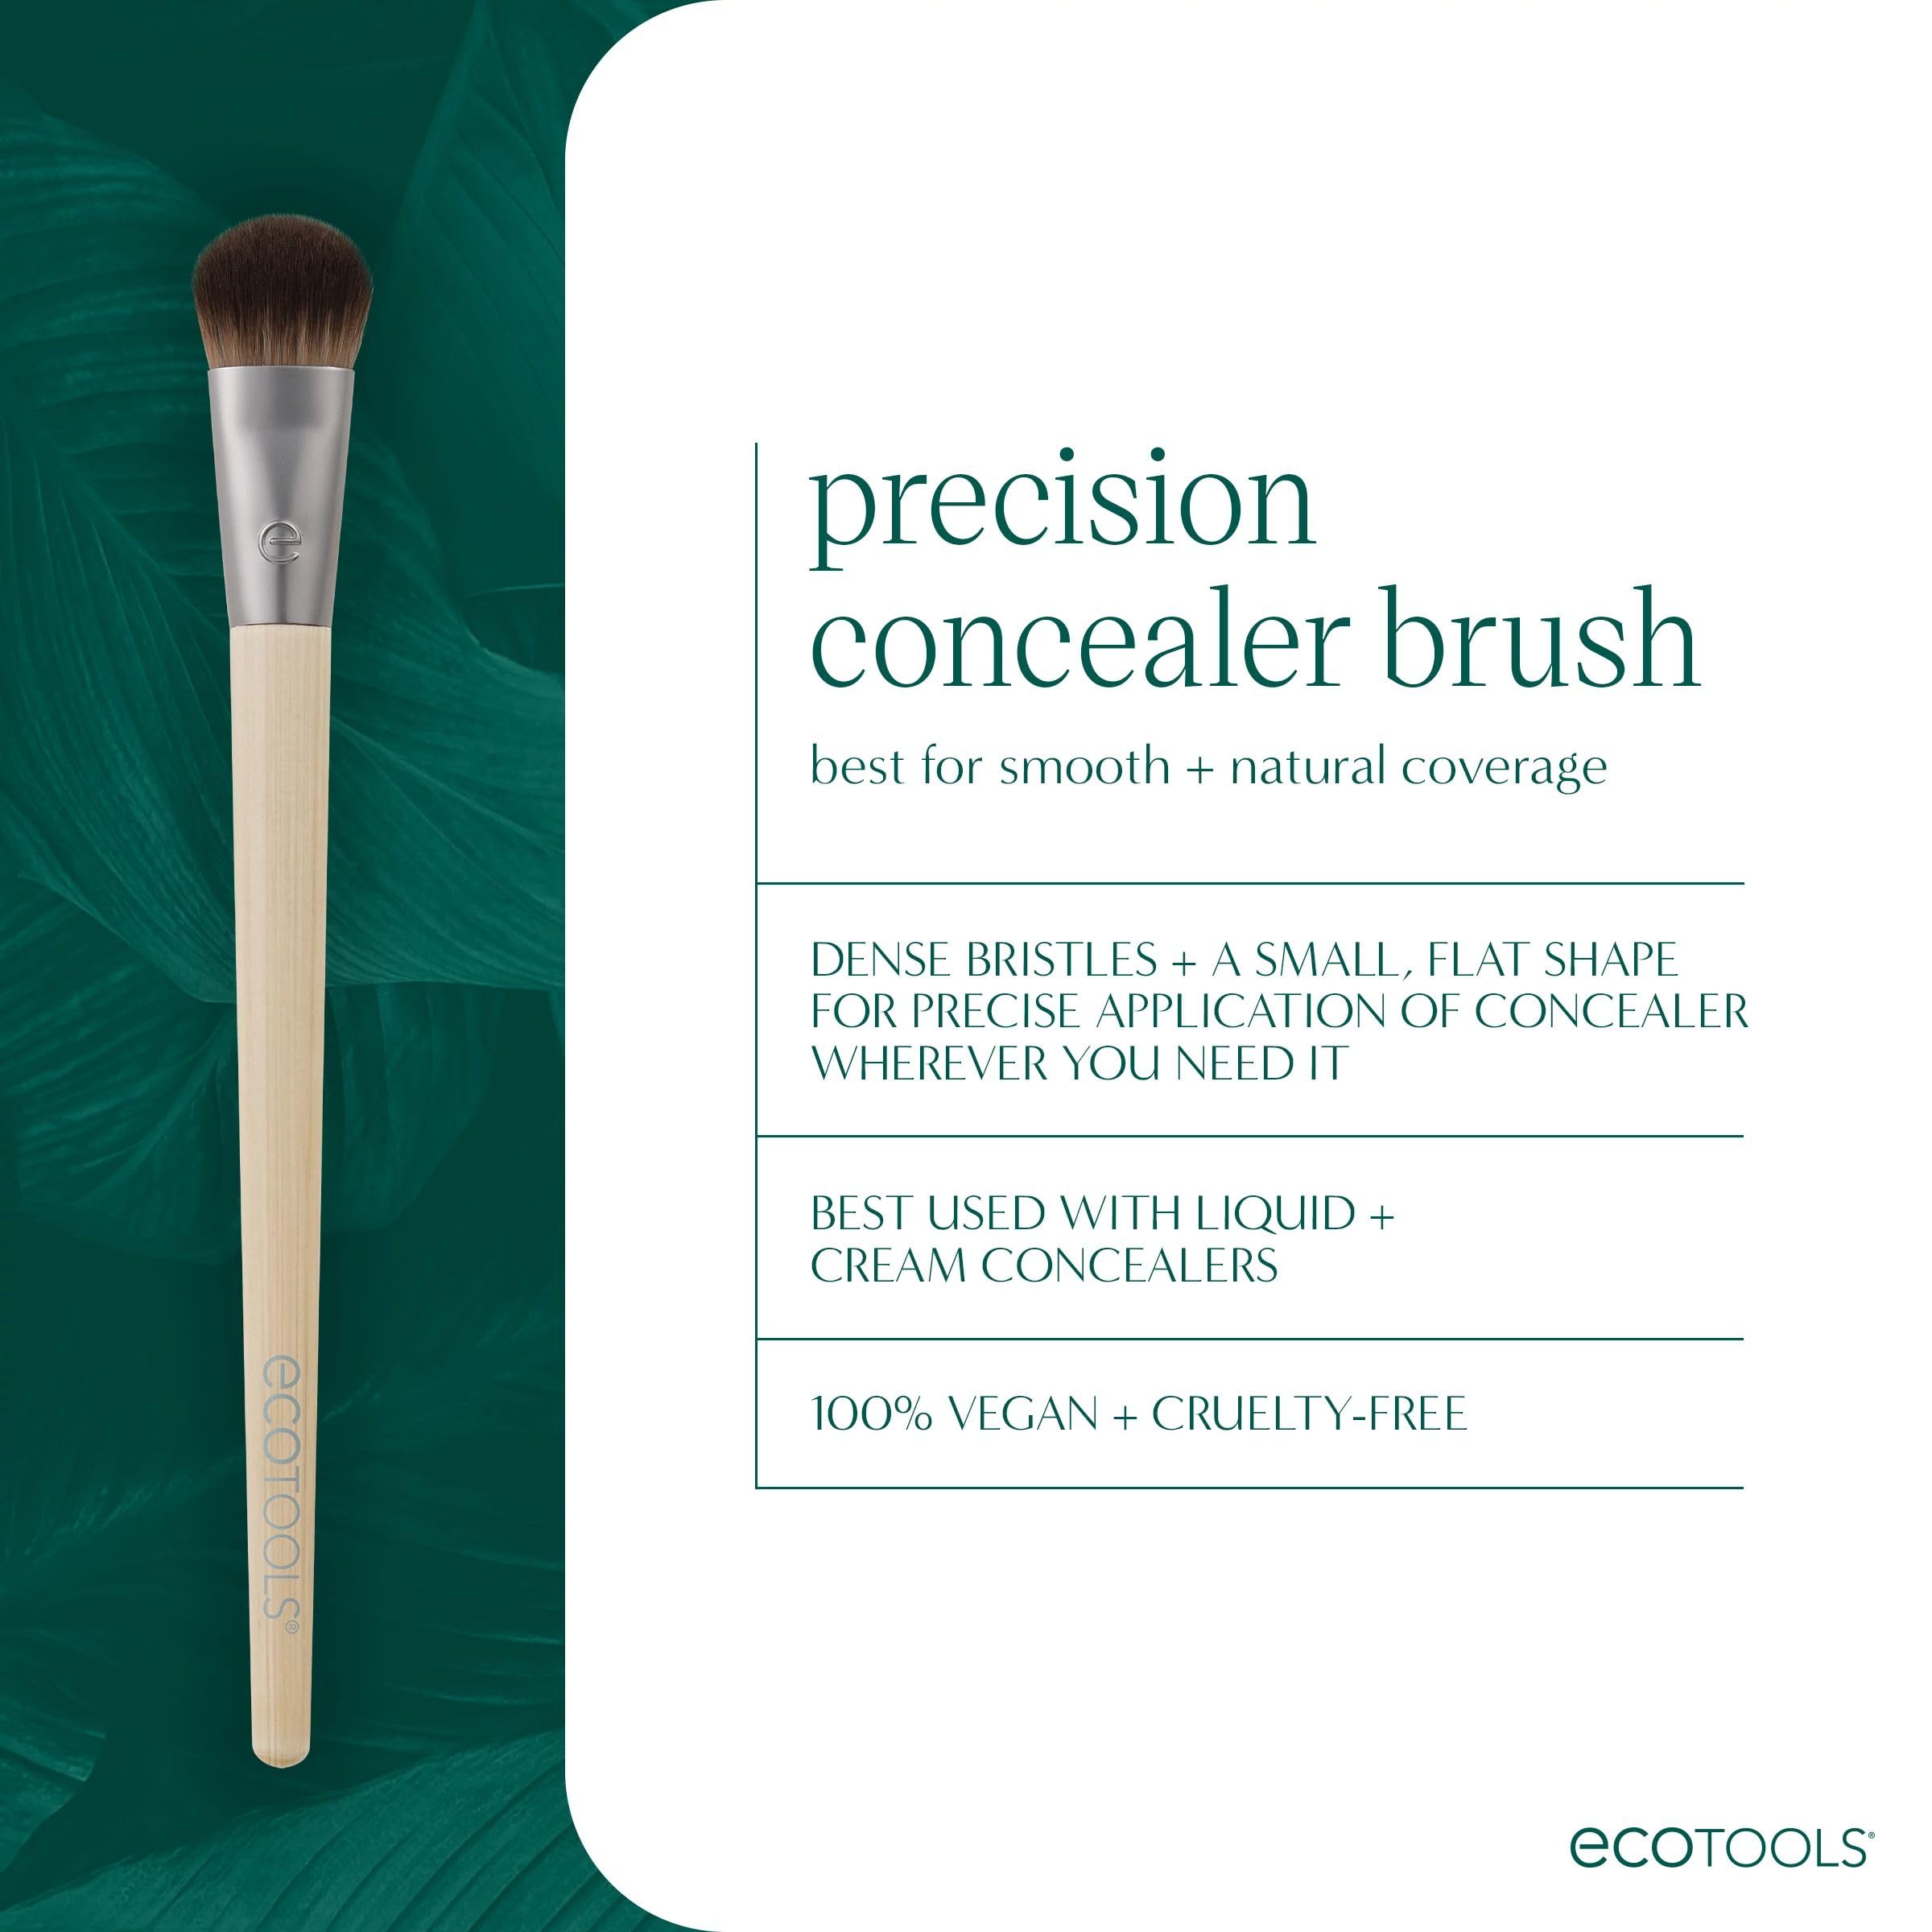 EcoTools Precision Concealer Makeup Brush, For Concealing Under Eyes & Imperfections, Sculpt Skin, Works With Liquid & Cream Makeup, Synthetic Bristles, Cruelty-Free & Vegan, 1 Count